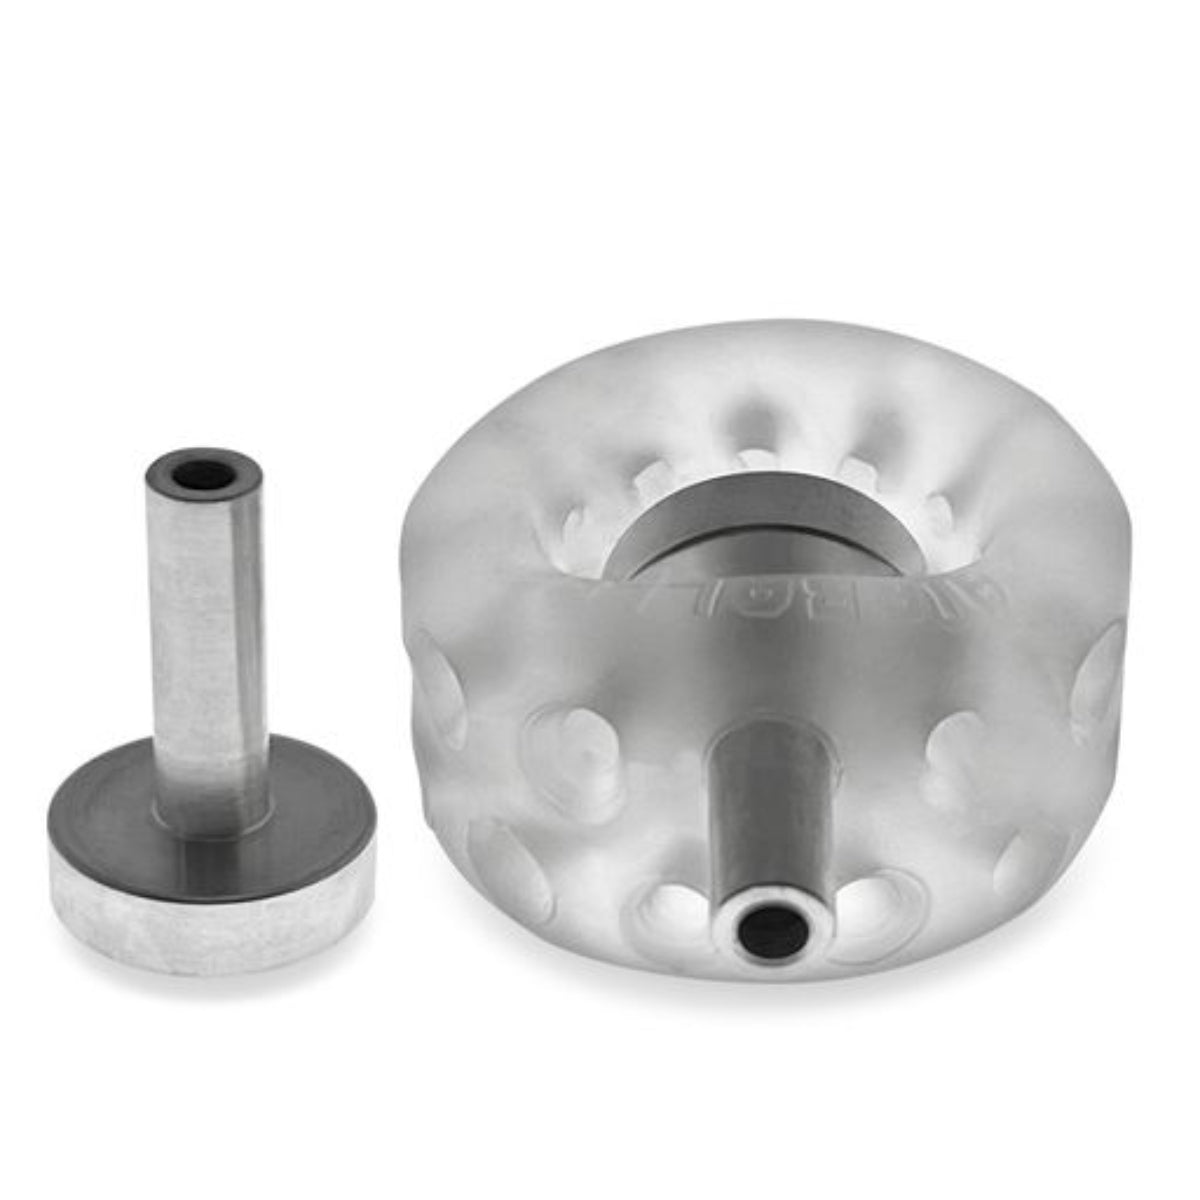 Oxballs Airballs Air-lite Electro Ball Stretcher Clear Ice (8132641423599)